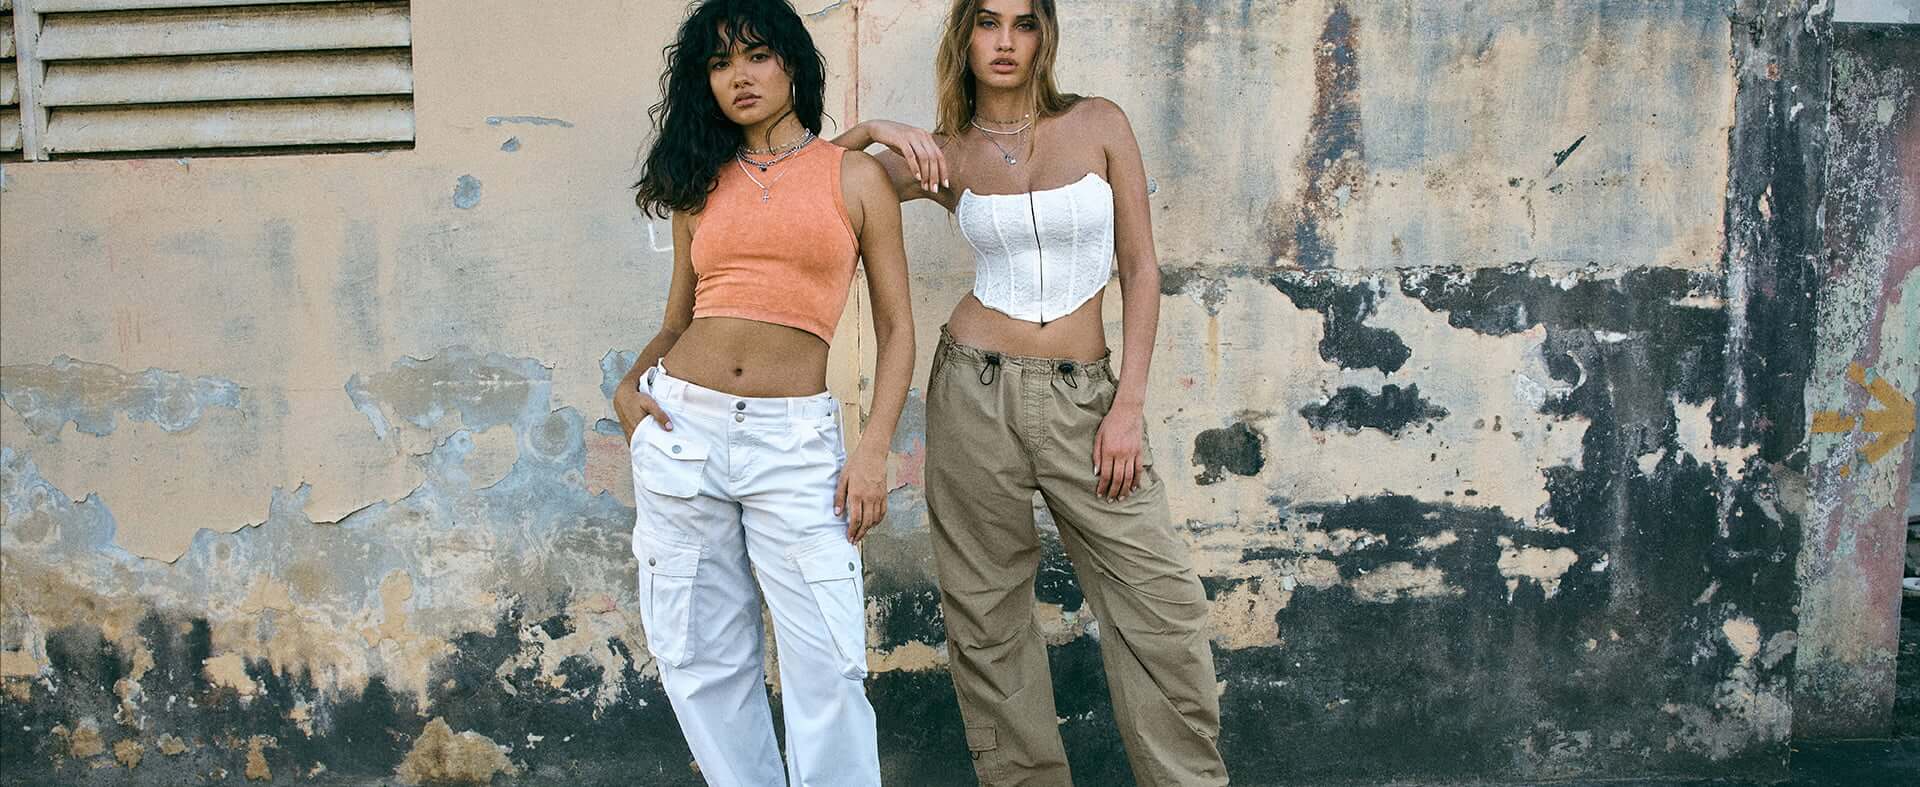 Two models pose on a sidewalk, one with an orange tank top and white cargo pants and the other in a white top with green cargos.